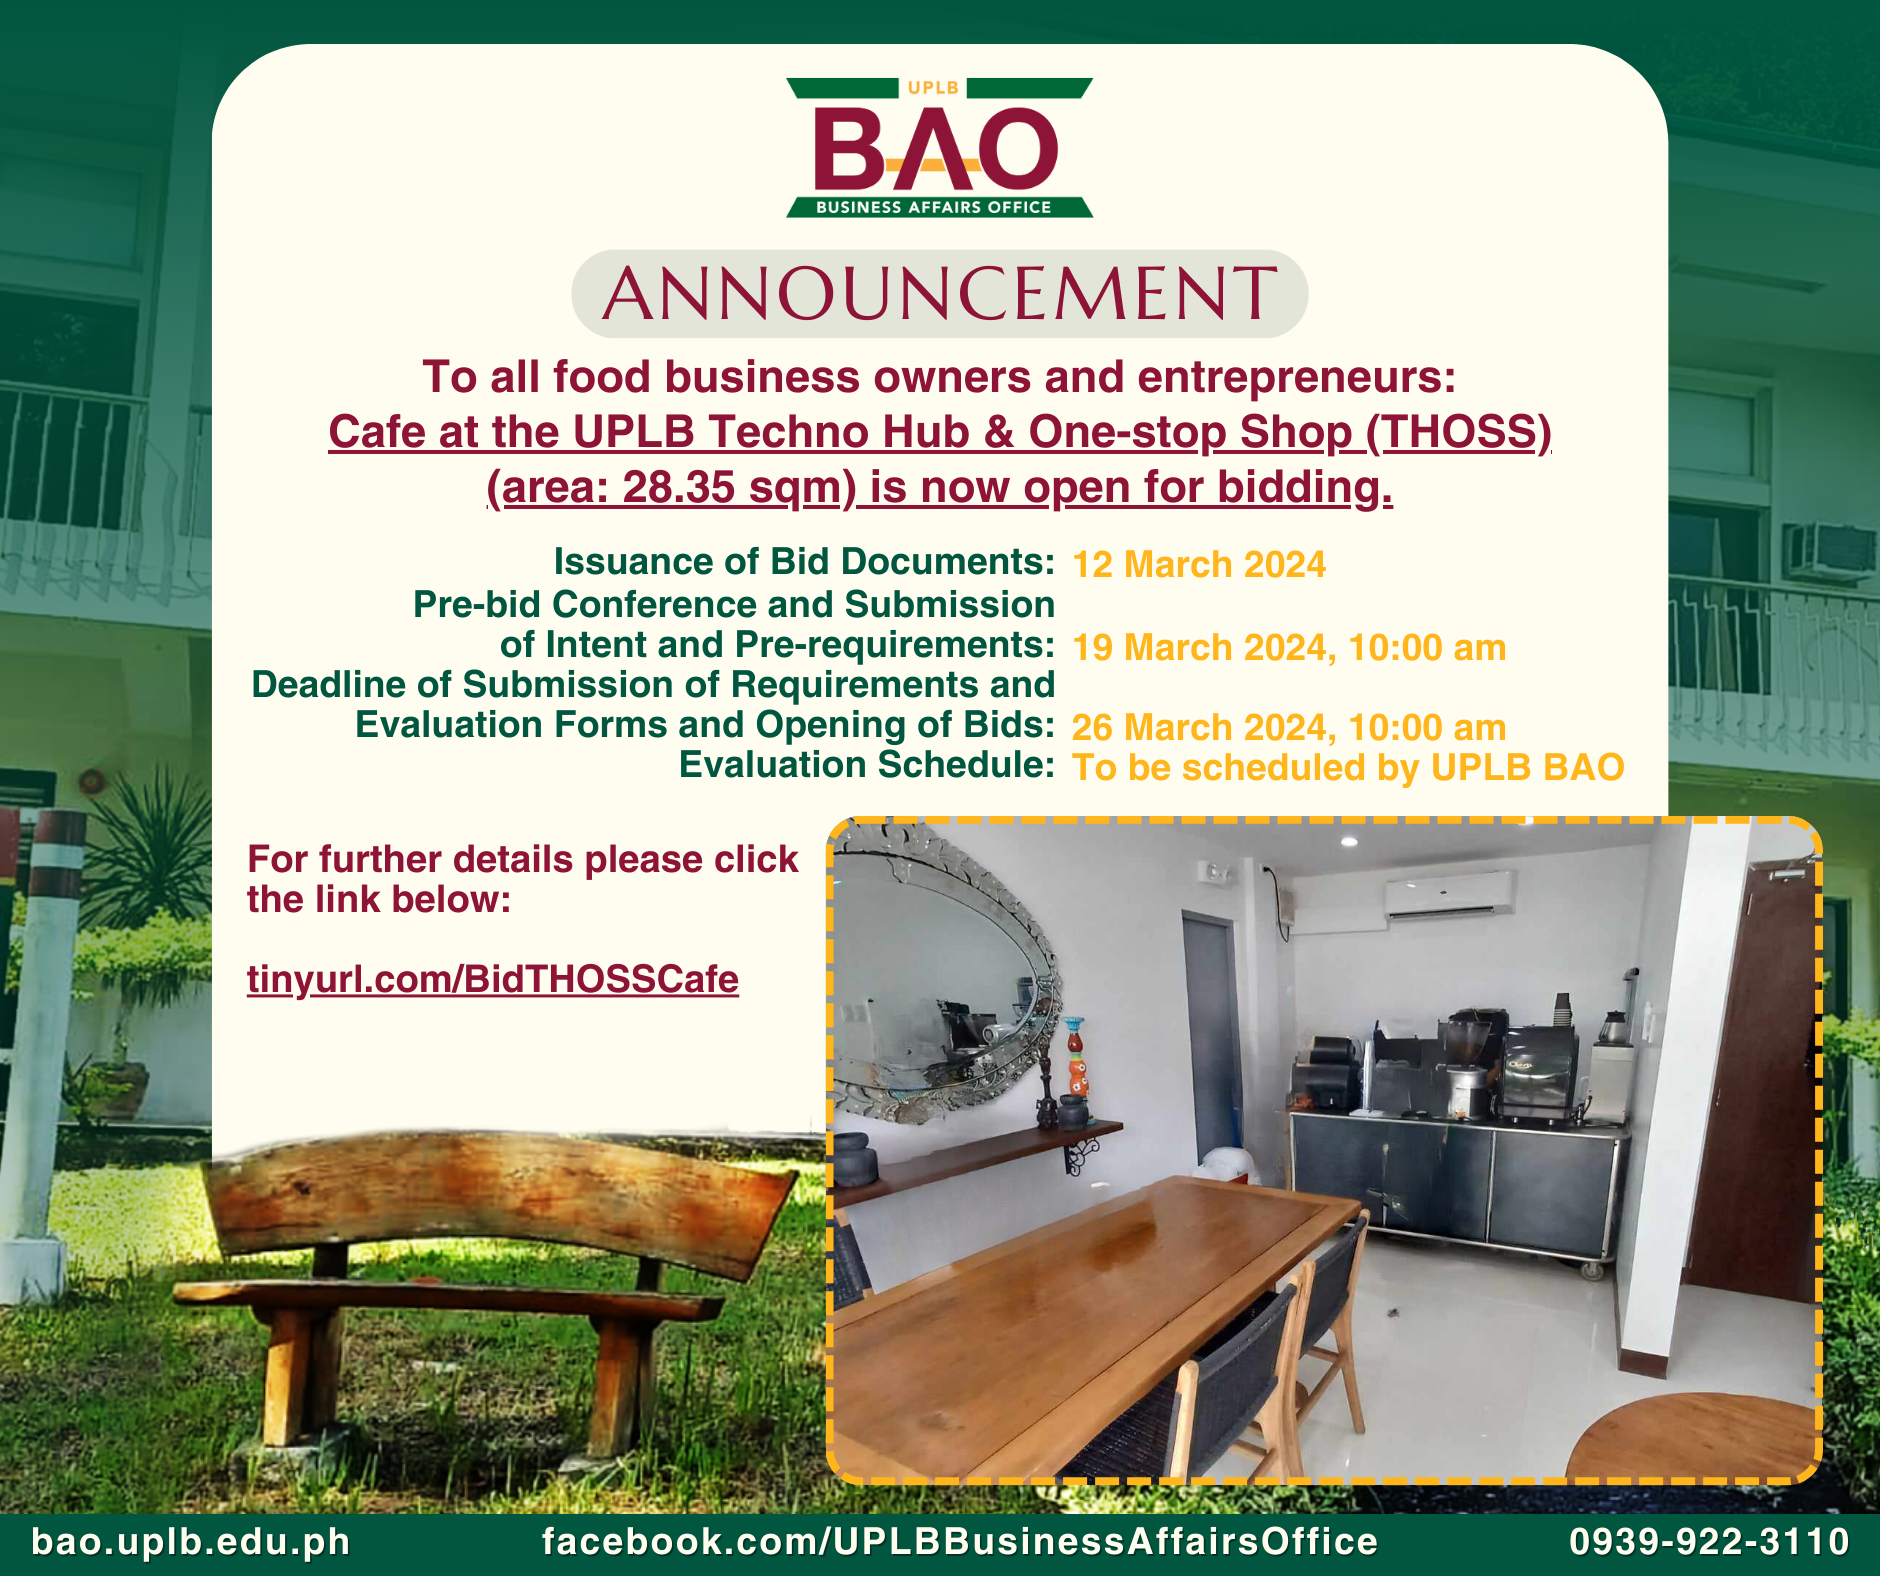 INVITATION TO BID: Available Space – Cafe at the UPLB Techno Hub & One-stop Shop (THOSS)